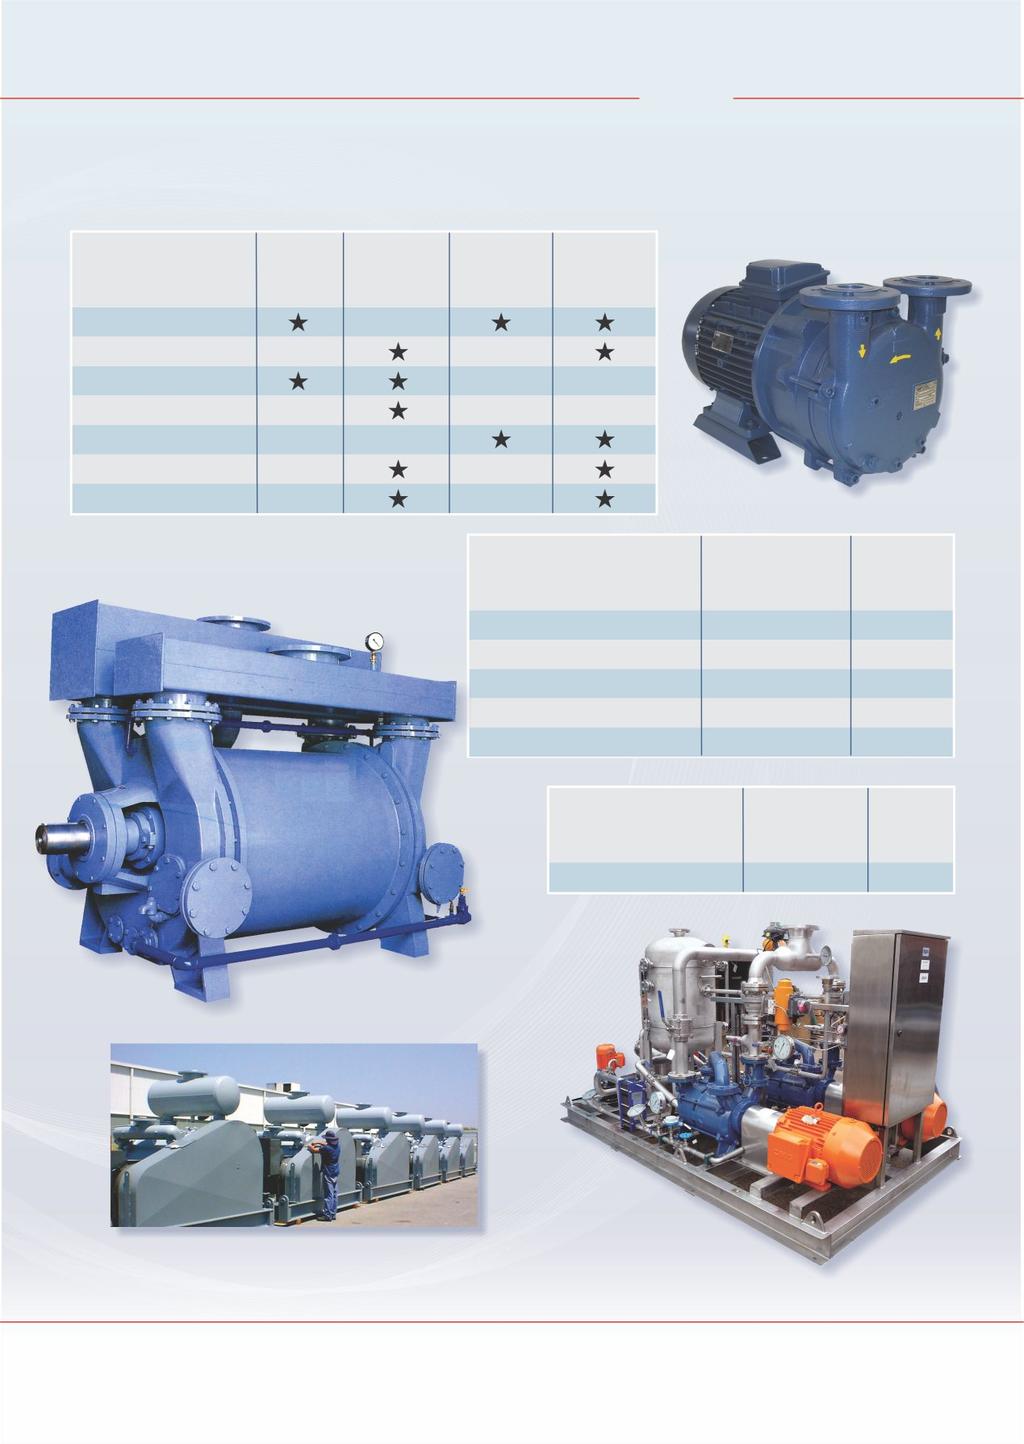 Liquid Ring Pumps & Compressors is able to manufacture complete engineered vacuum systems comprising single or two stage units with vacuum vessels, piping valves and instrumentation.